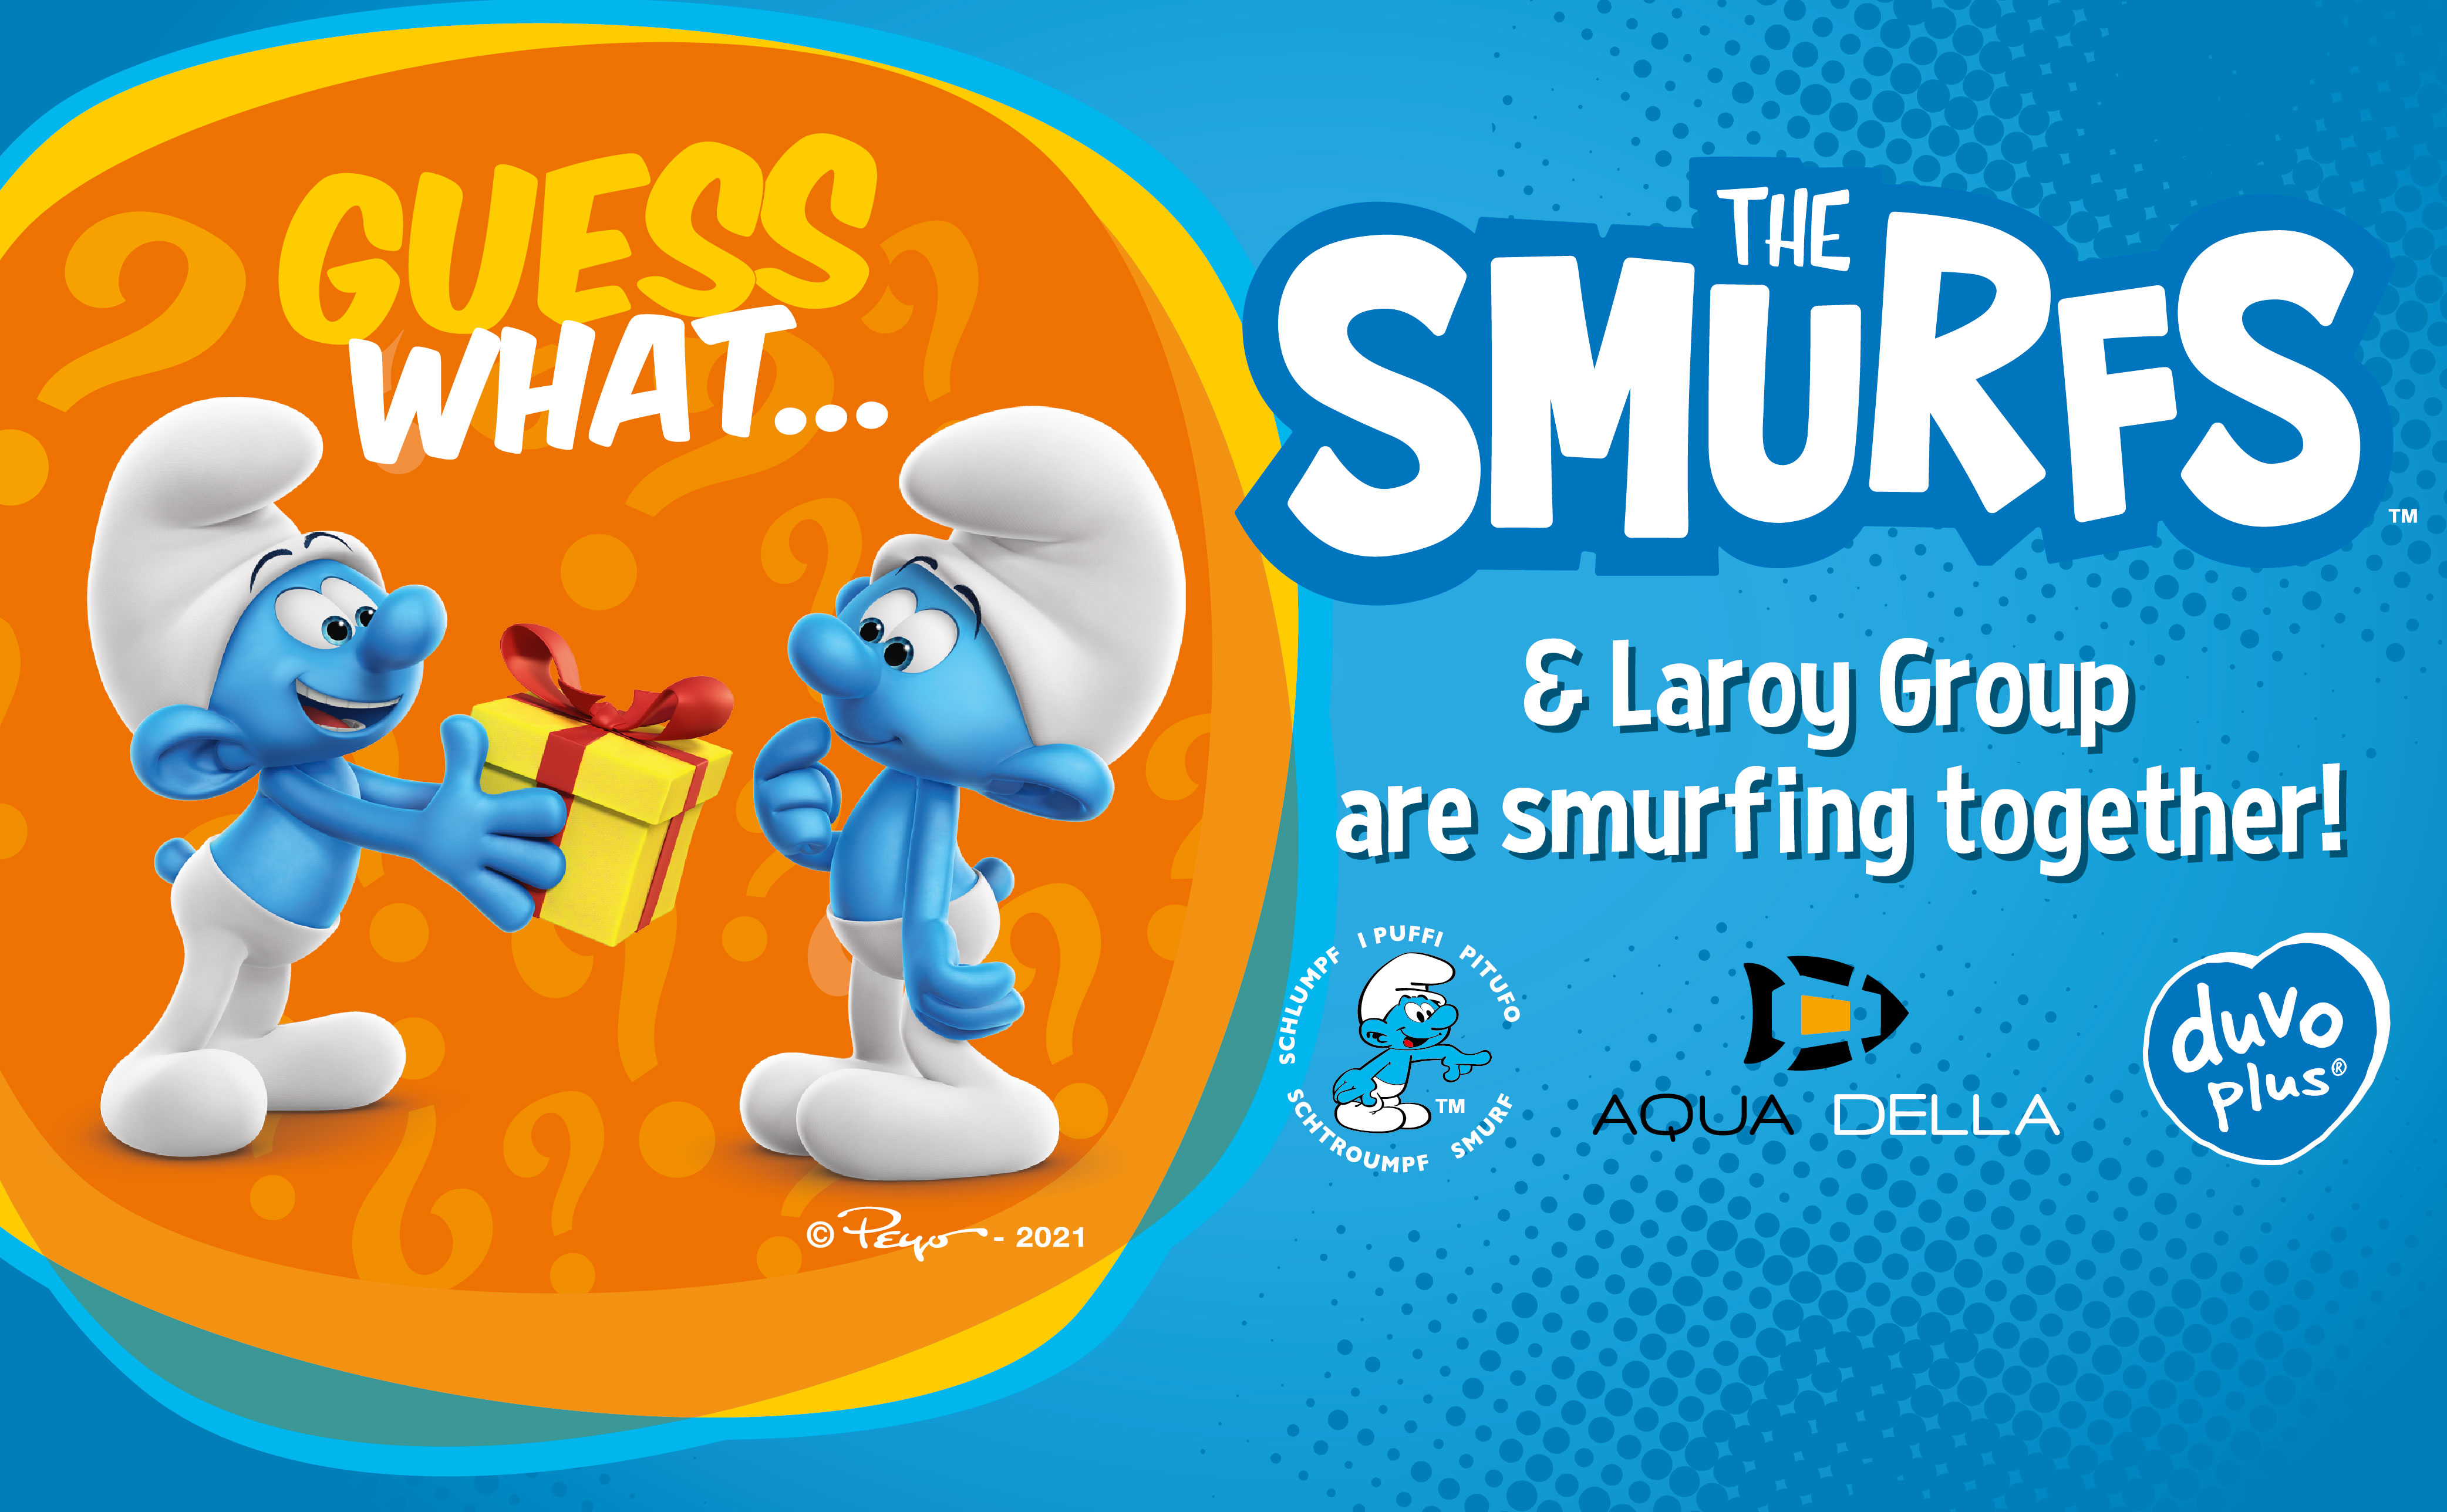 Laroy Group and the smurfs!